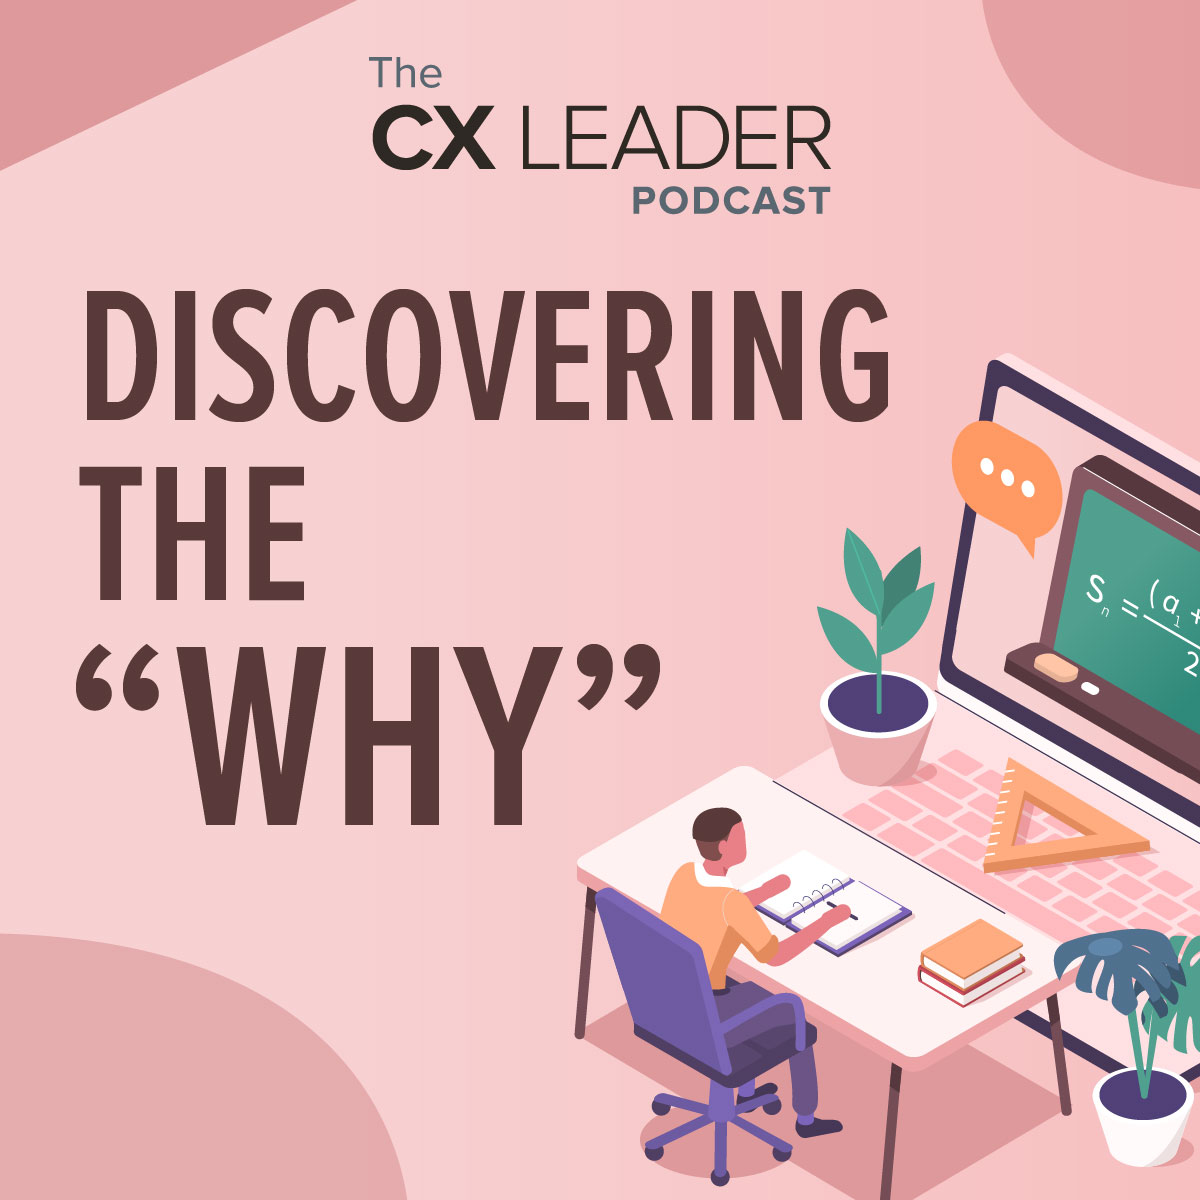 Discovering the “Why”